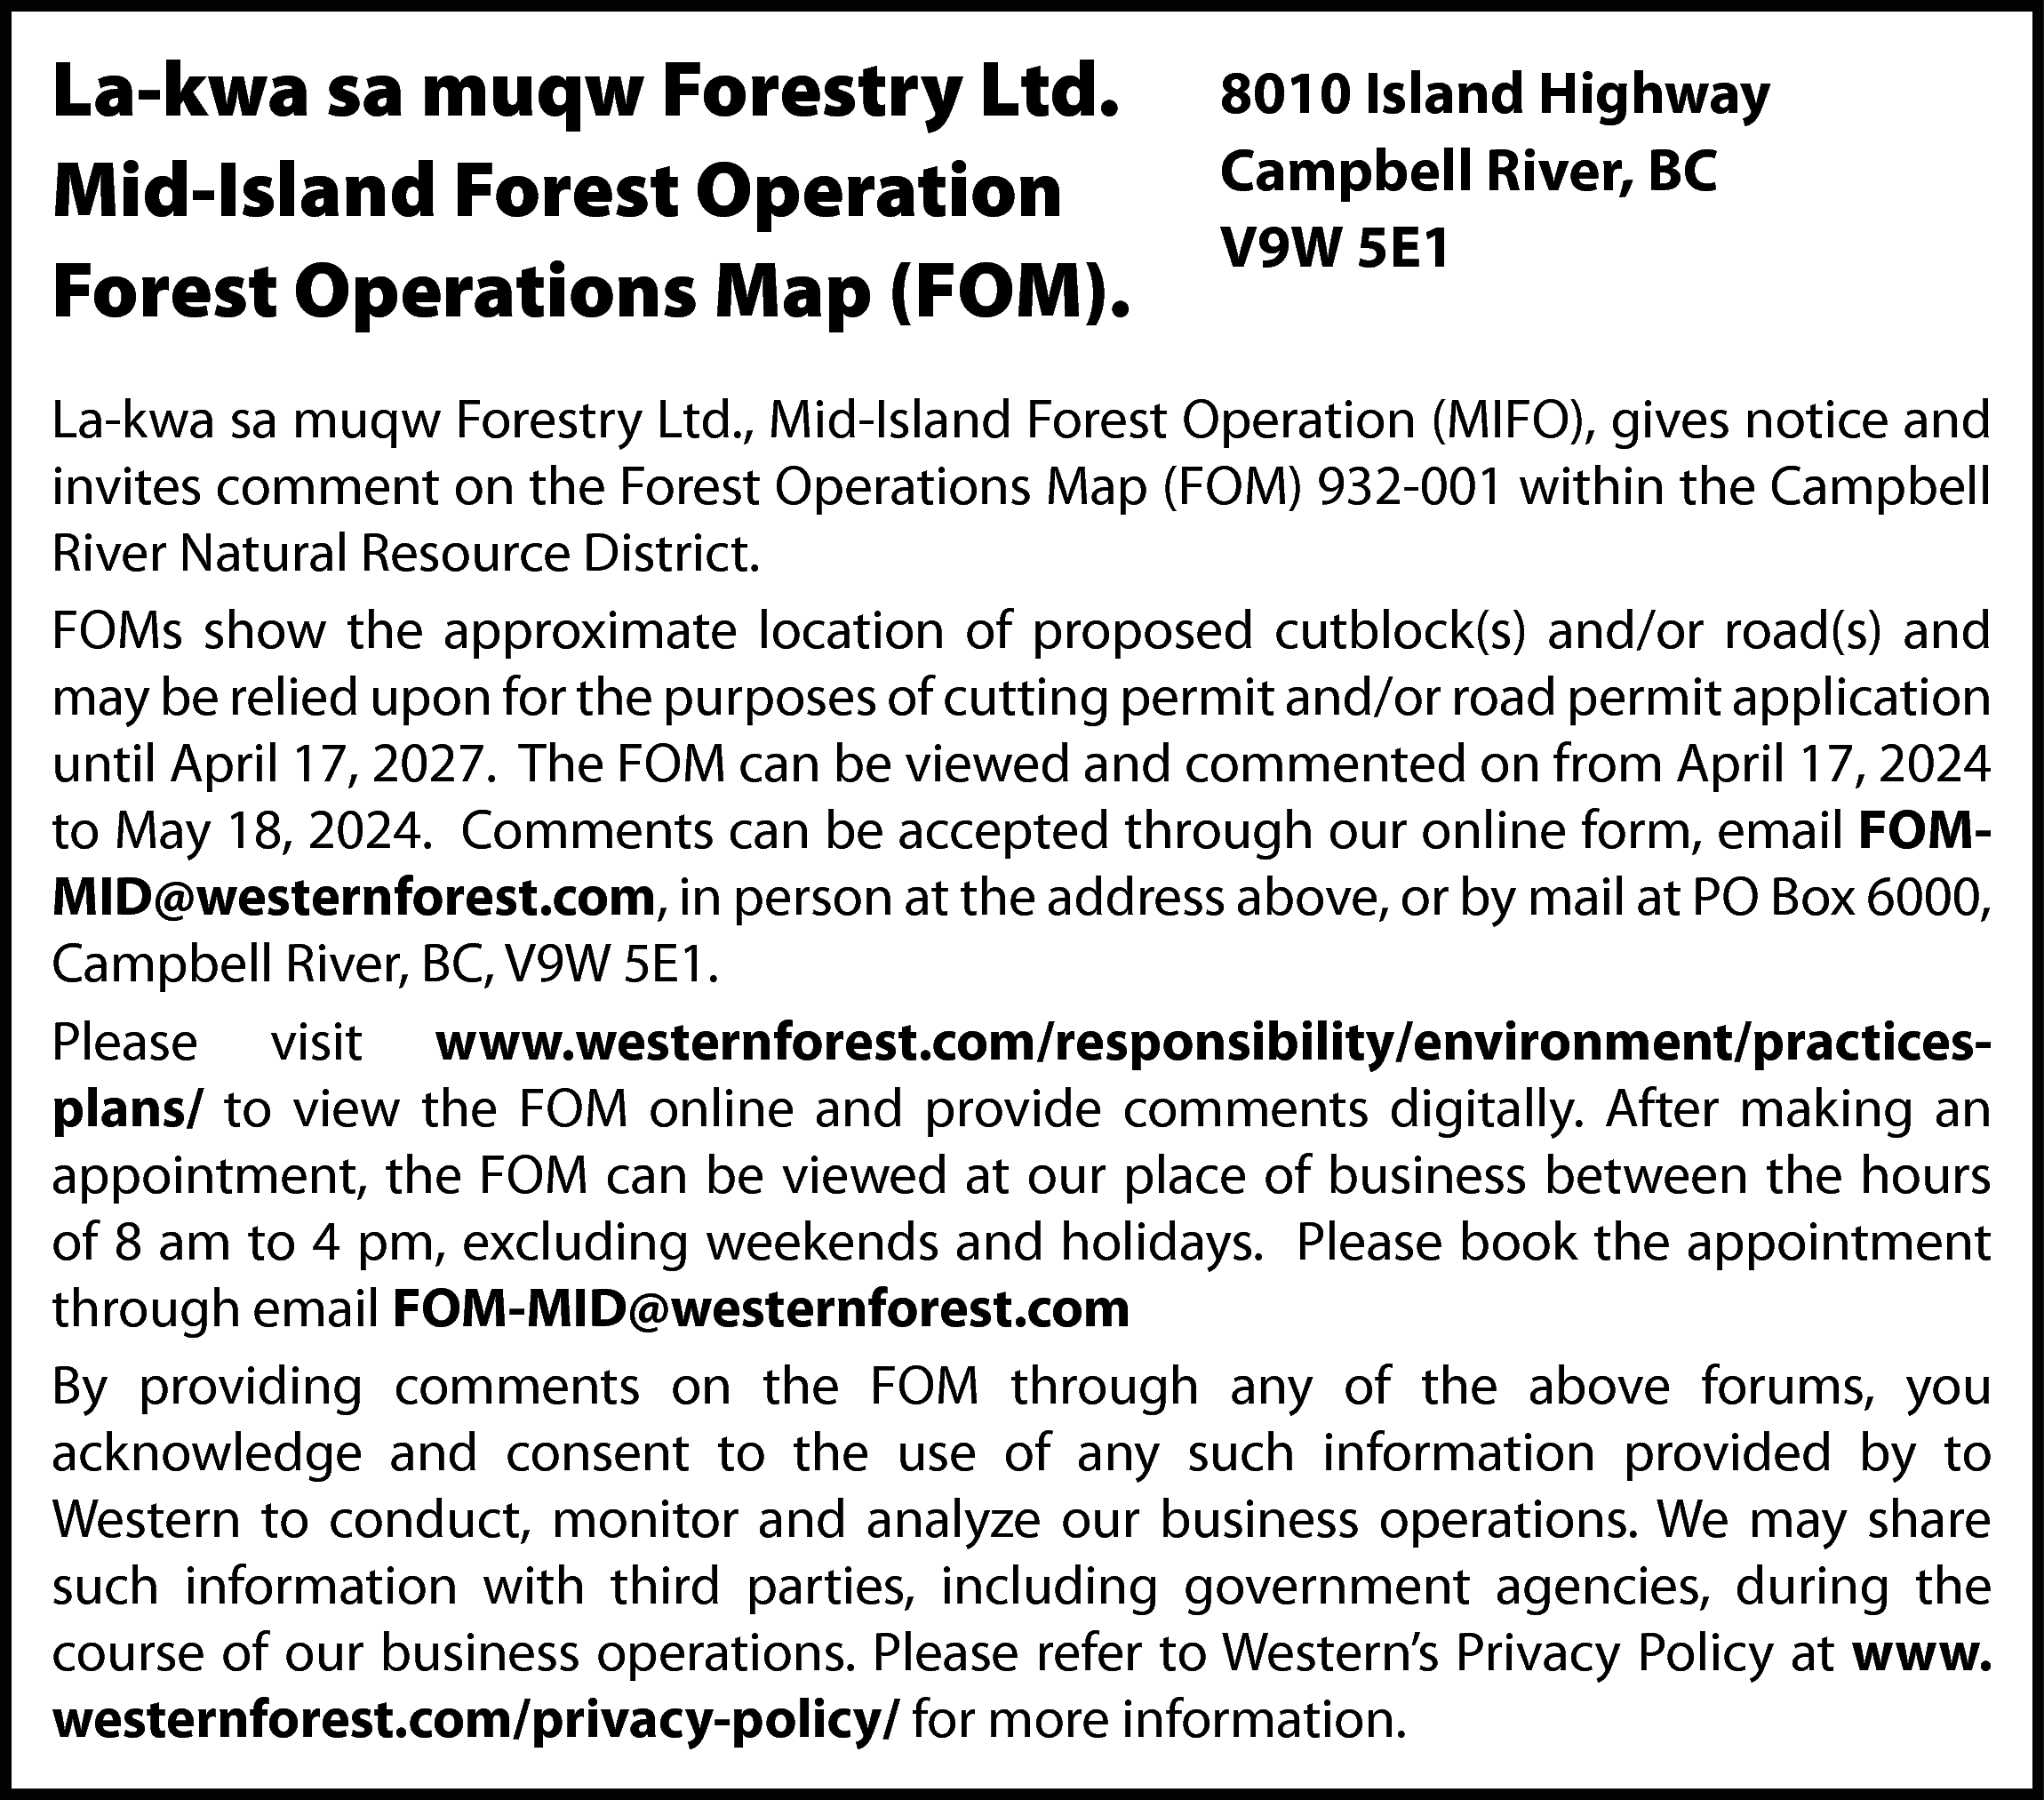 La-kwa sa muqw Forestry Ltd.  La-kwa sa muqw Forestry Ltd.  Mid-Island Forest Operation  Forest Operations Map (FOM).    8010 Island Highway  Campbell River, BC  V9W 5E1    La-kwa sa muqw Forestry Ltd., Mid-Island Forest Operation (MIFO), gives notice and  invites comment on the Forest Operations Map (FOM) 932-001 within the Campbell  River Natural Resource District.  FOMs show the approximate location of proposed cutblock(s) and/or road(s) and  may be relied upon for the purposes of cutting permit and/or road permit application  until April 17, 2027. The FOM can be viewed and commented on from April 17, 2024  to May 18, 2024. Comments can be accepted through our online form, email FOMMID@westernforest.com, in person at the address above, or by mail at PO Box 6000,  Campbell River, BC, V9W 5E1.  Please visit www.westernforest.com/responsibility/environment/practicesplans/ to view the FOM online and provide comments digitally. After making an  appointment, the FOM can be viewed at our place of business between the hours  of 8 am to 4 pm, excluding weekends and holidays. Please book the appointment  through email FOM-MID@westernforest.com  By providing comments on the FOM through any of the above forums, you  acknowledge and consent to the use of any such information provided by to  Western to conduct, monitor and analyze our business operations. We may share  such information with third parties, including government agencies, during the  course of our business operations. Please refer to Western’s Privacy Policy at www.  westernforest.com/privacy-policy/ for more information.    